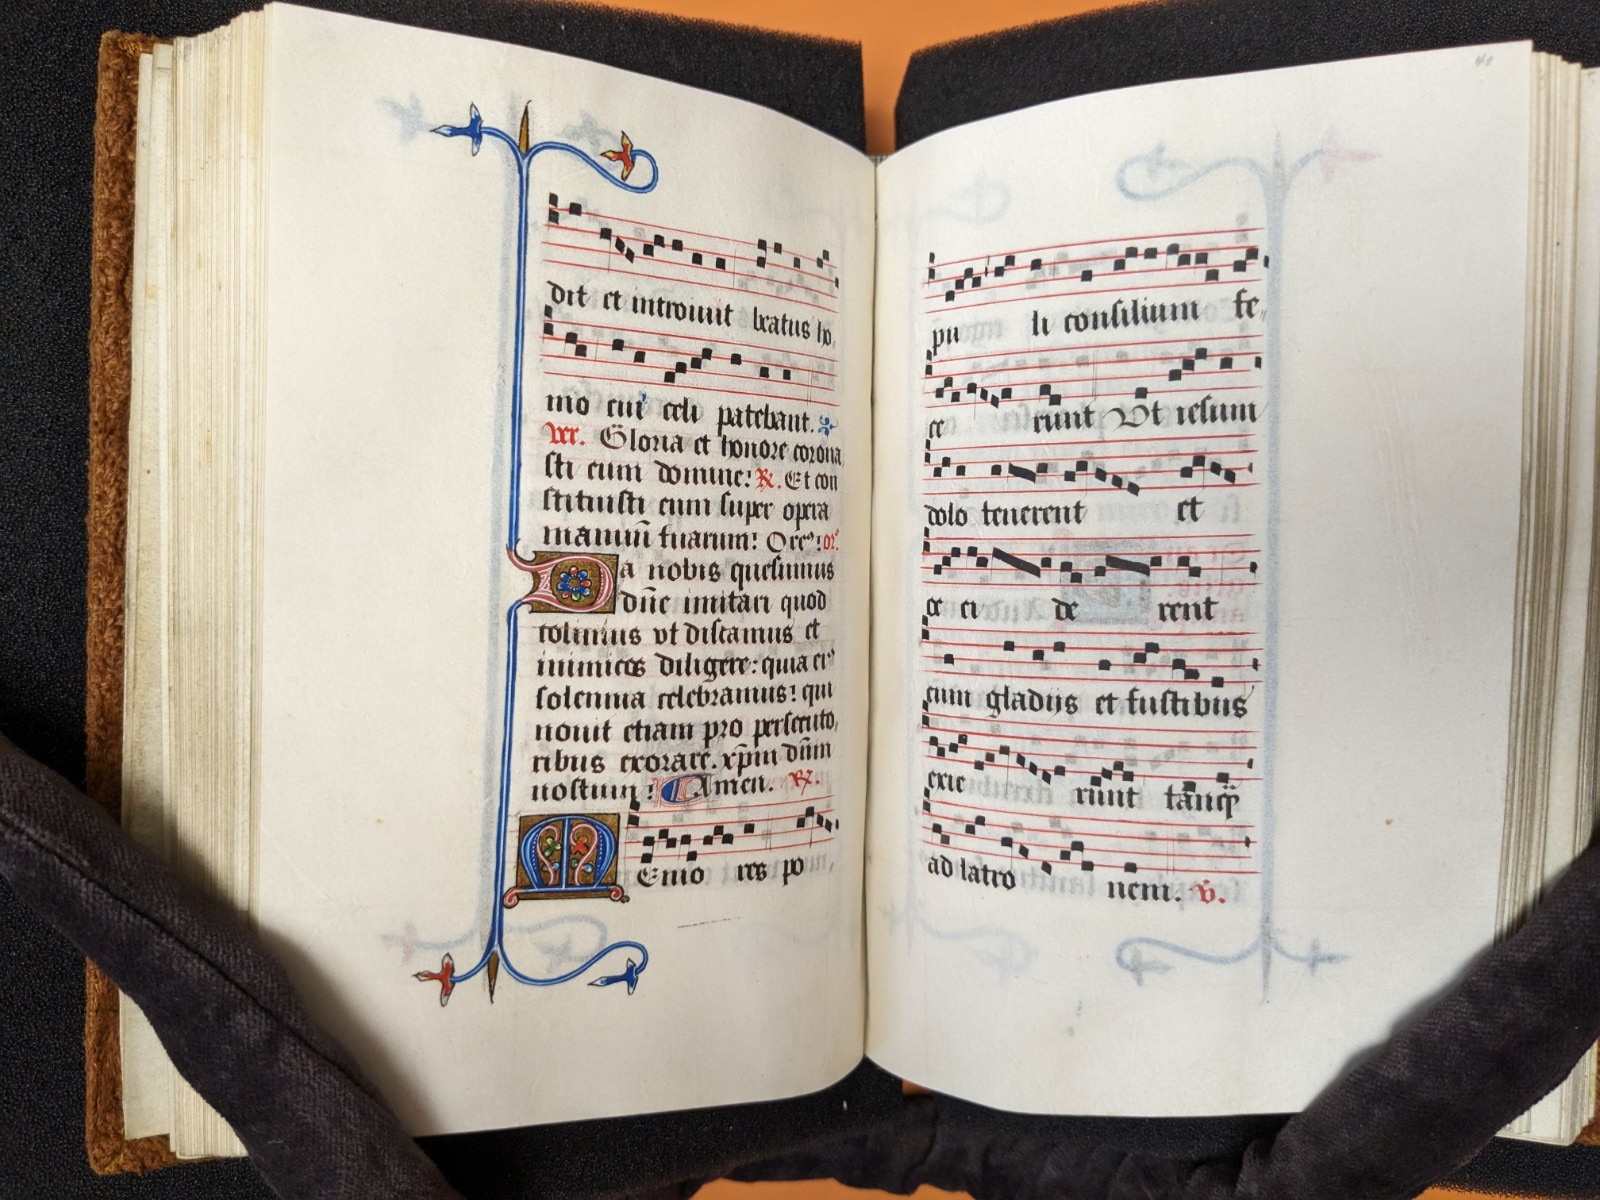 Abb. 8: The Memores error at the bottom of the left page, SBB PK: Mus.ms. 40599, f. 39v. – Photo by C. T. Jones